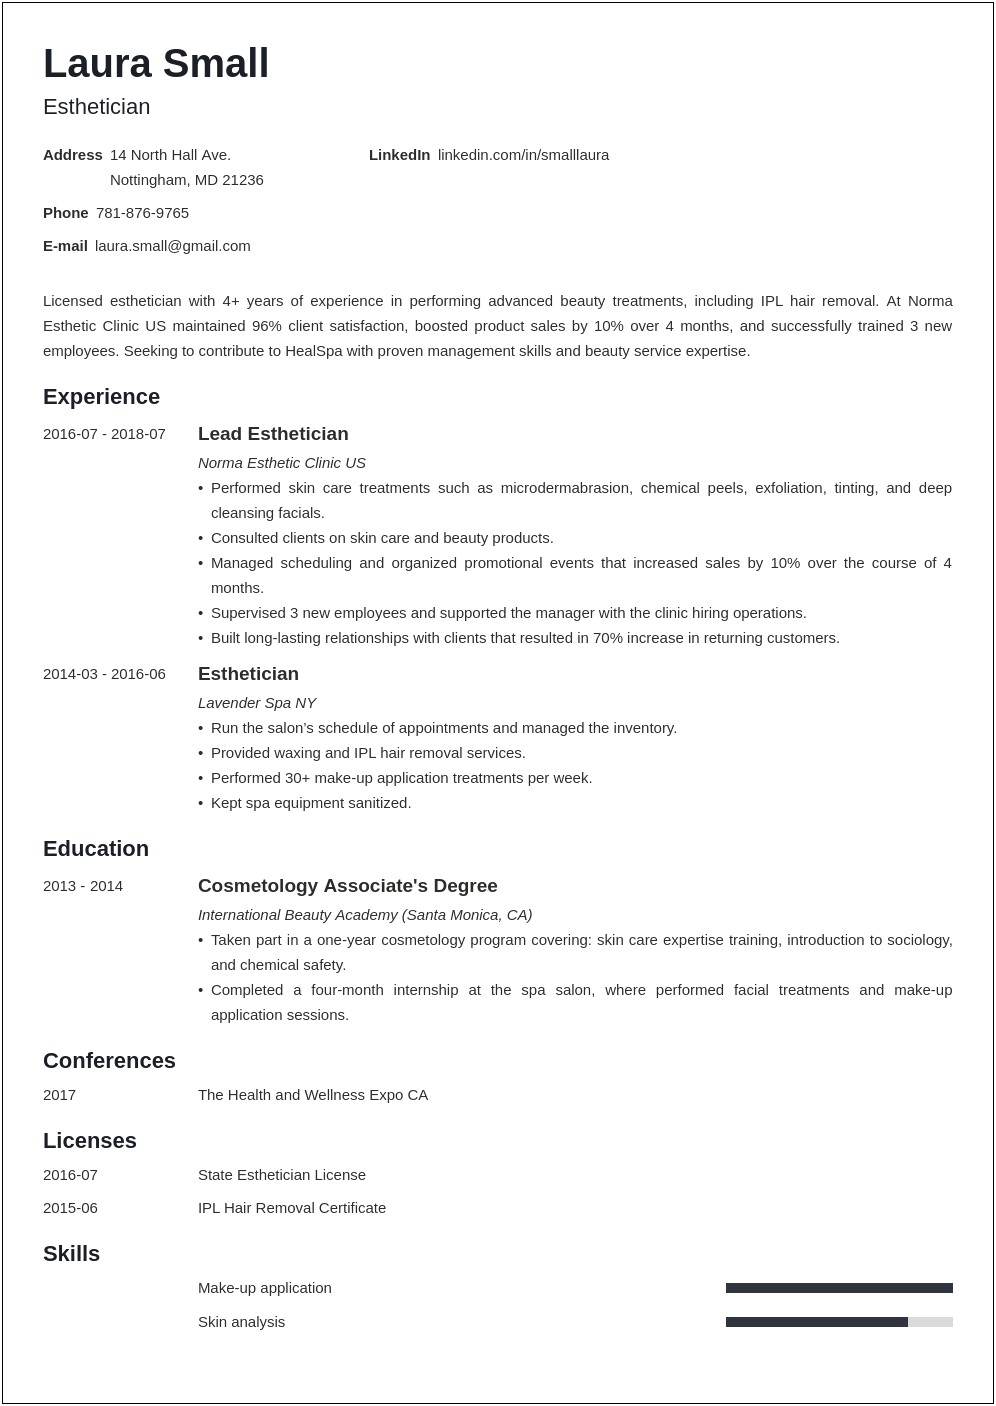 Best Way To Improve Resume For Spa